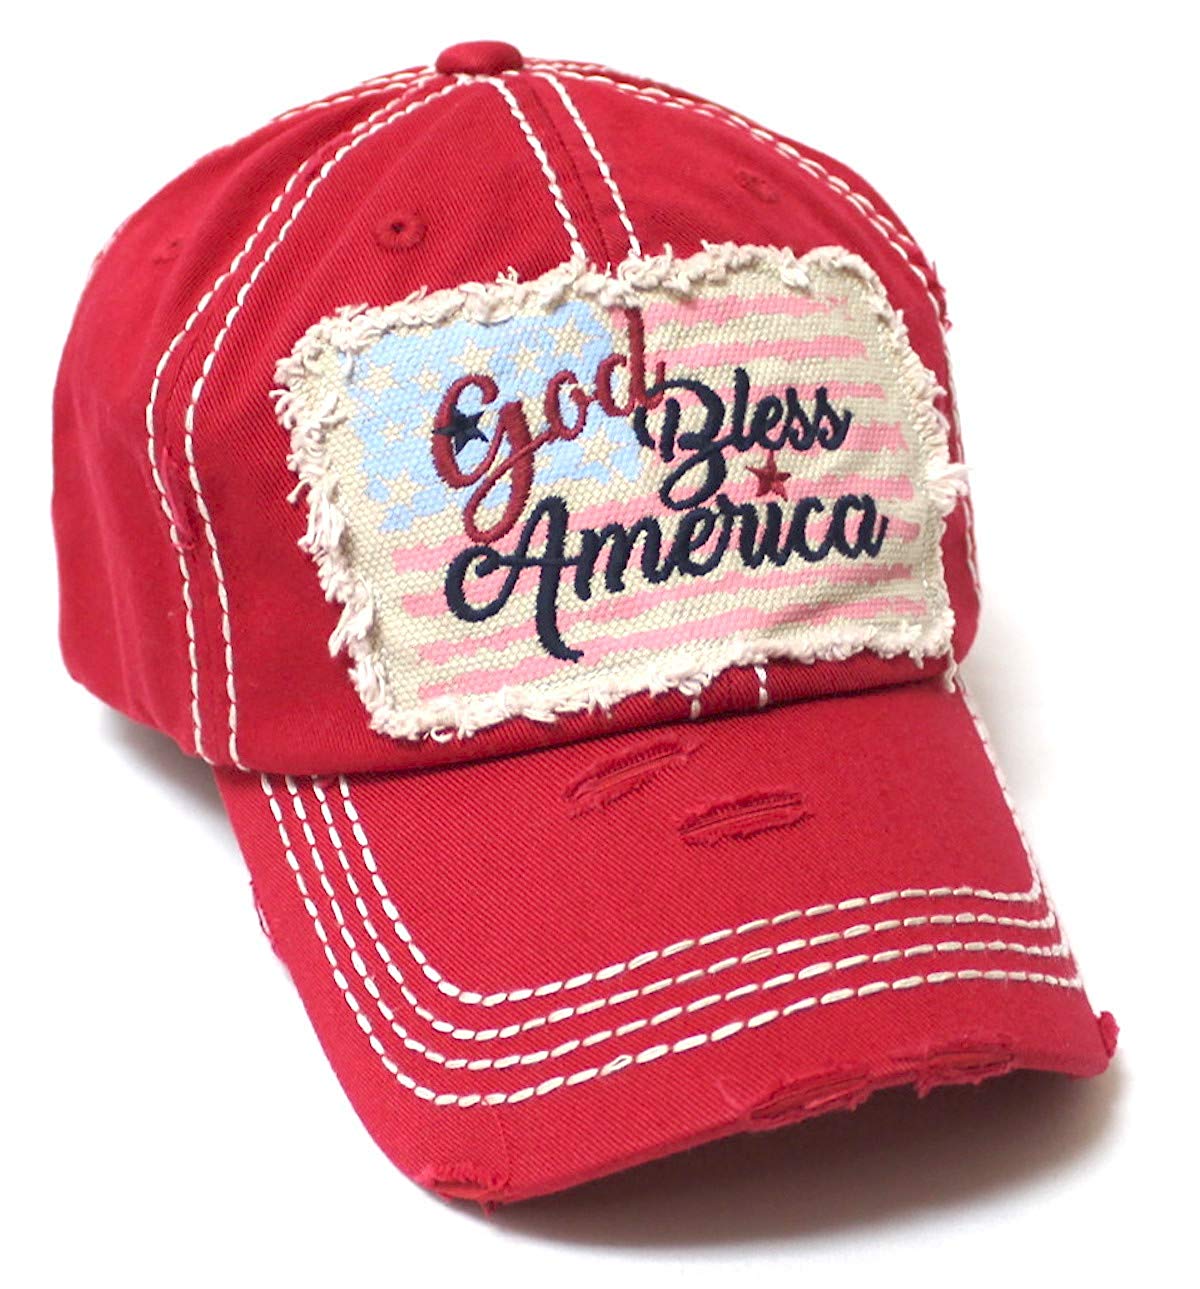 CAPS 'N VINTAGE July 4 Celebratory USA Flag Patch God Bless America Embroidery Ballcap, Ruby Red - Caps 'N Vintage 